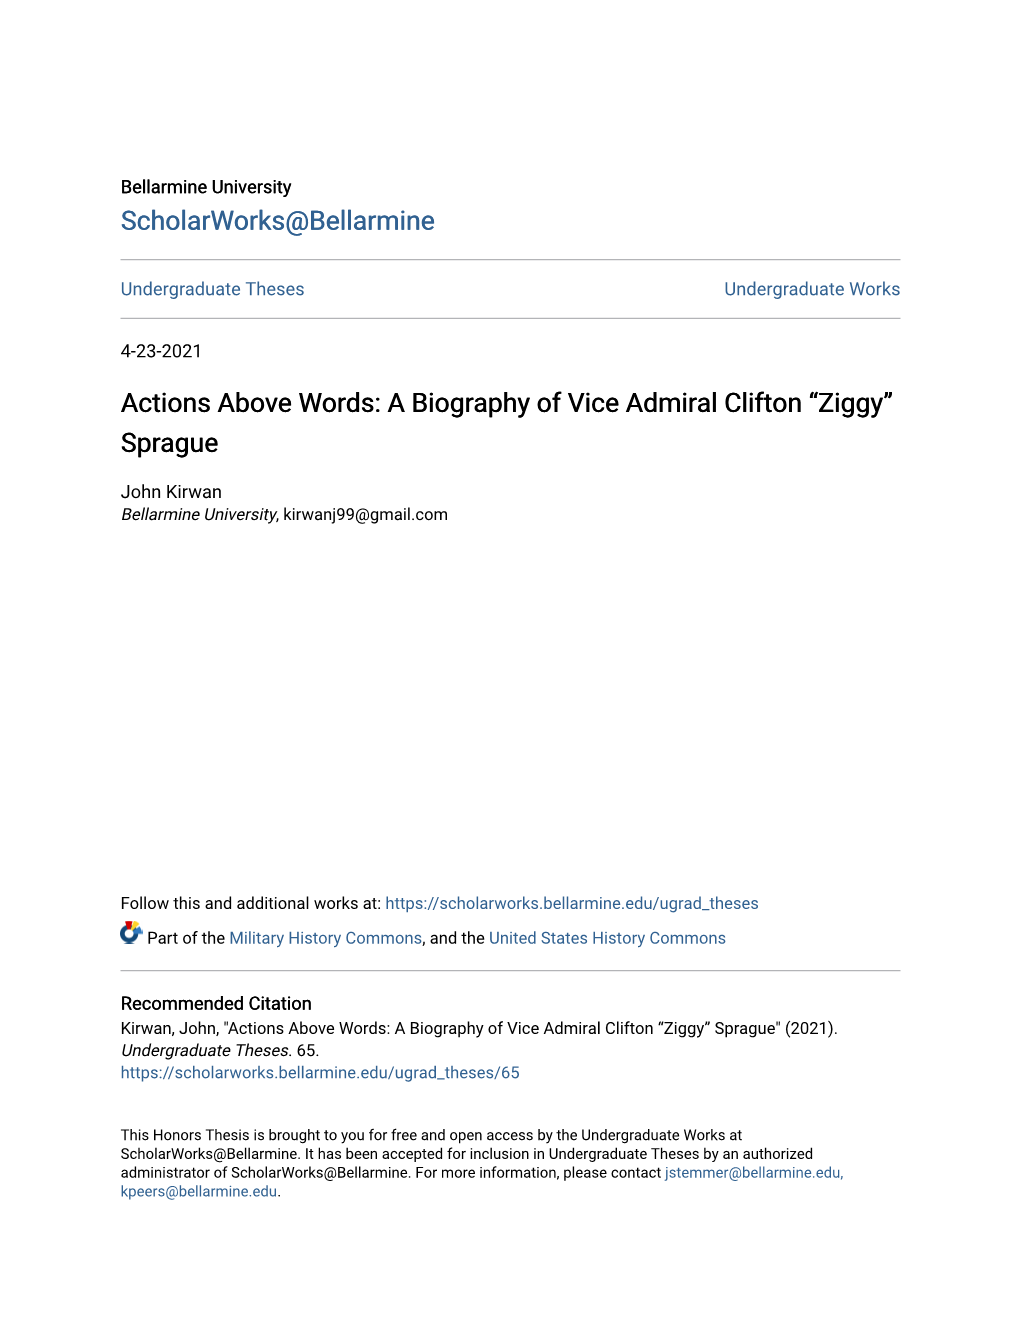 Actions Above Words: a Biography of Vice Admiral Clifton “Ziggy” Sprague